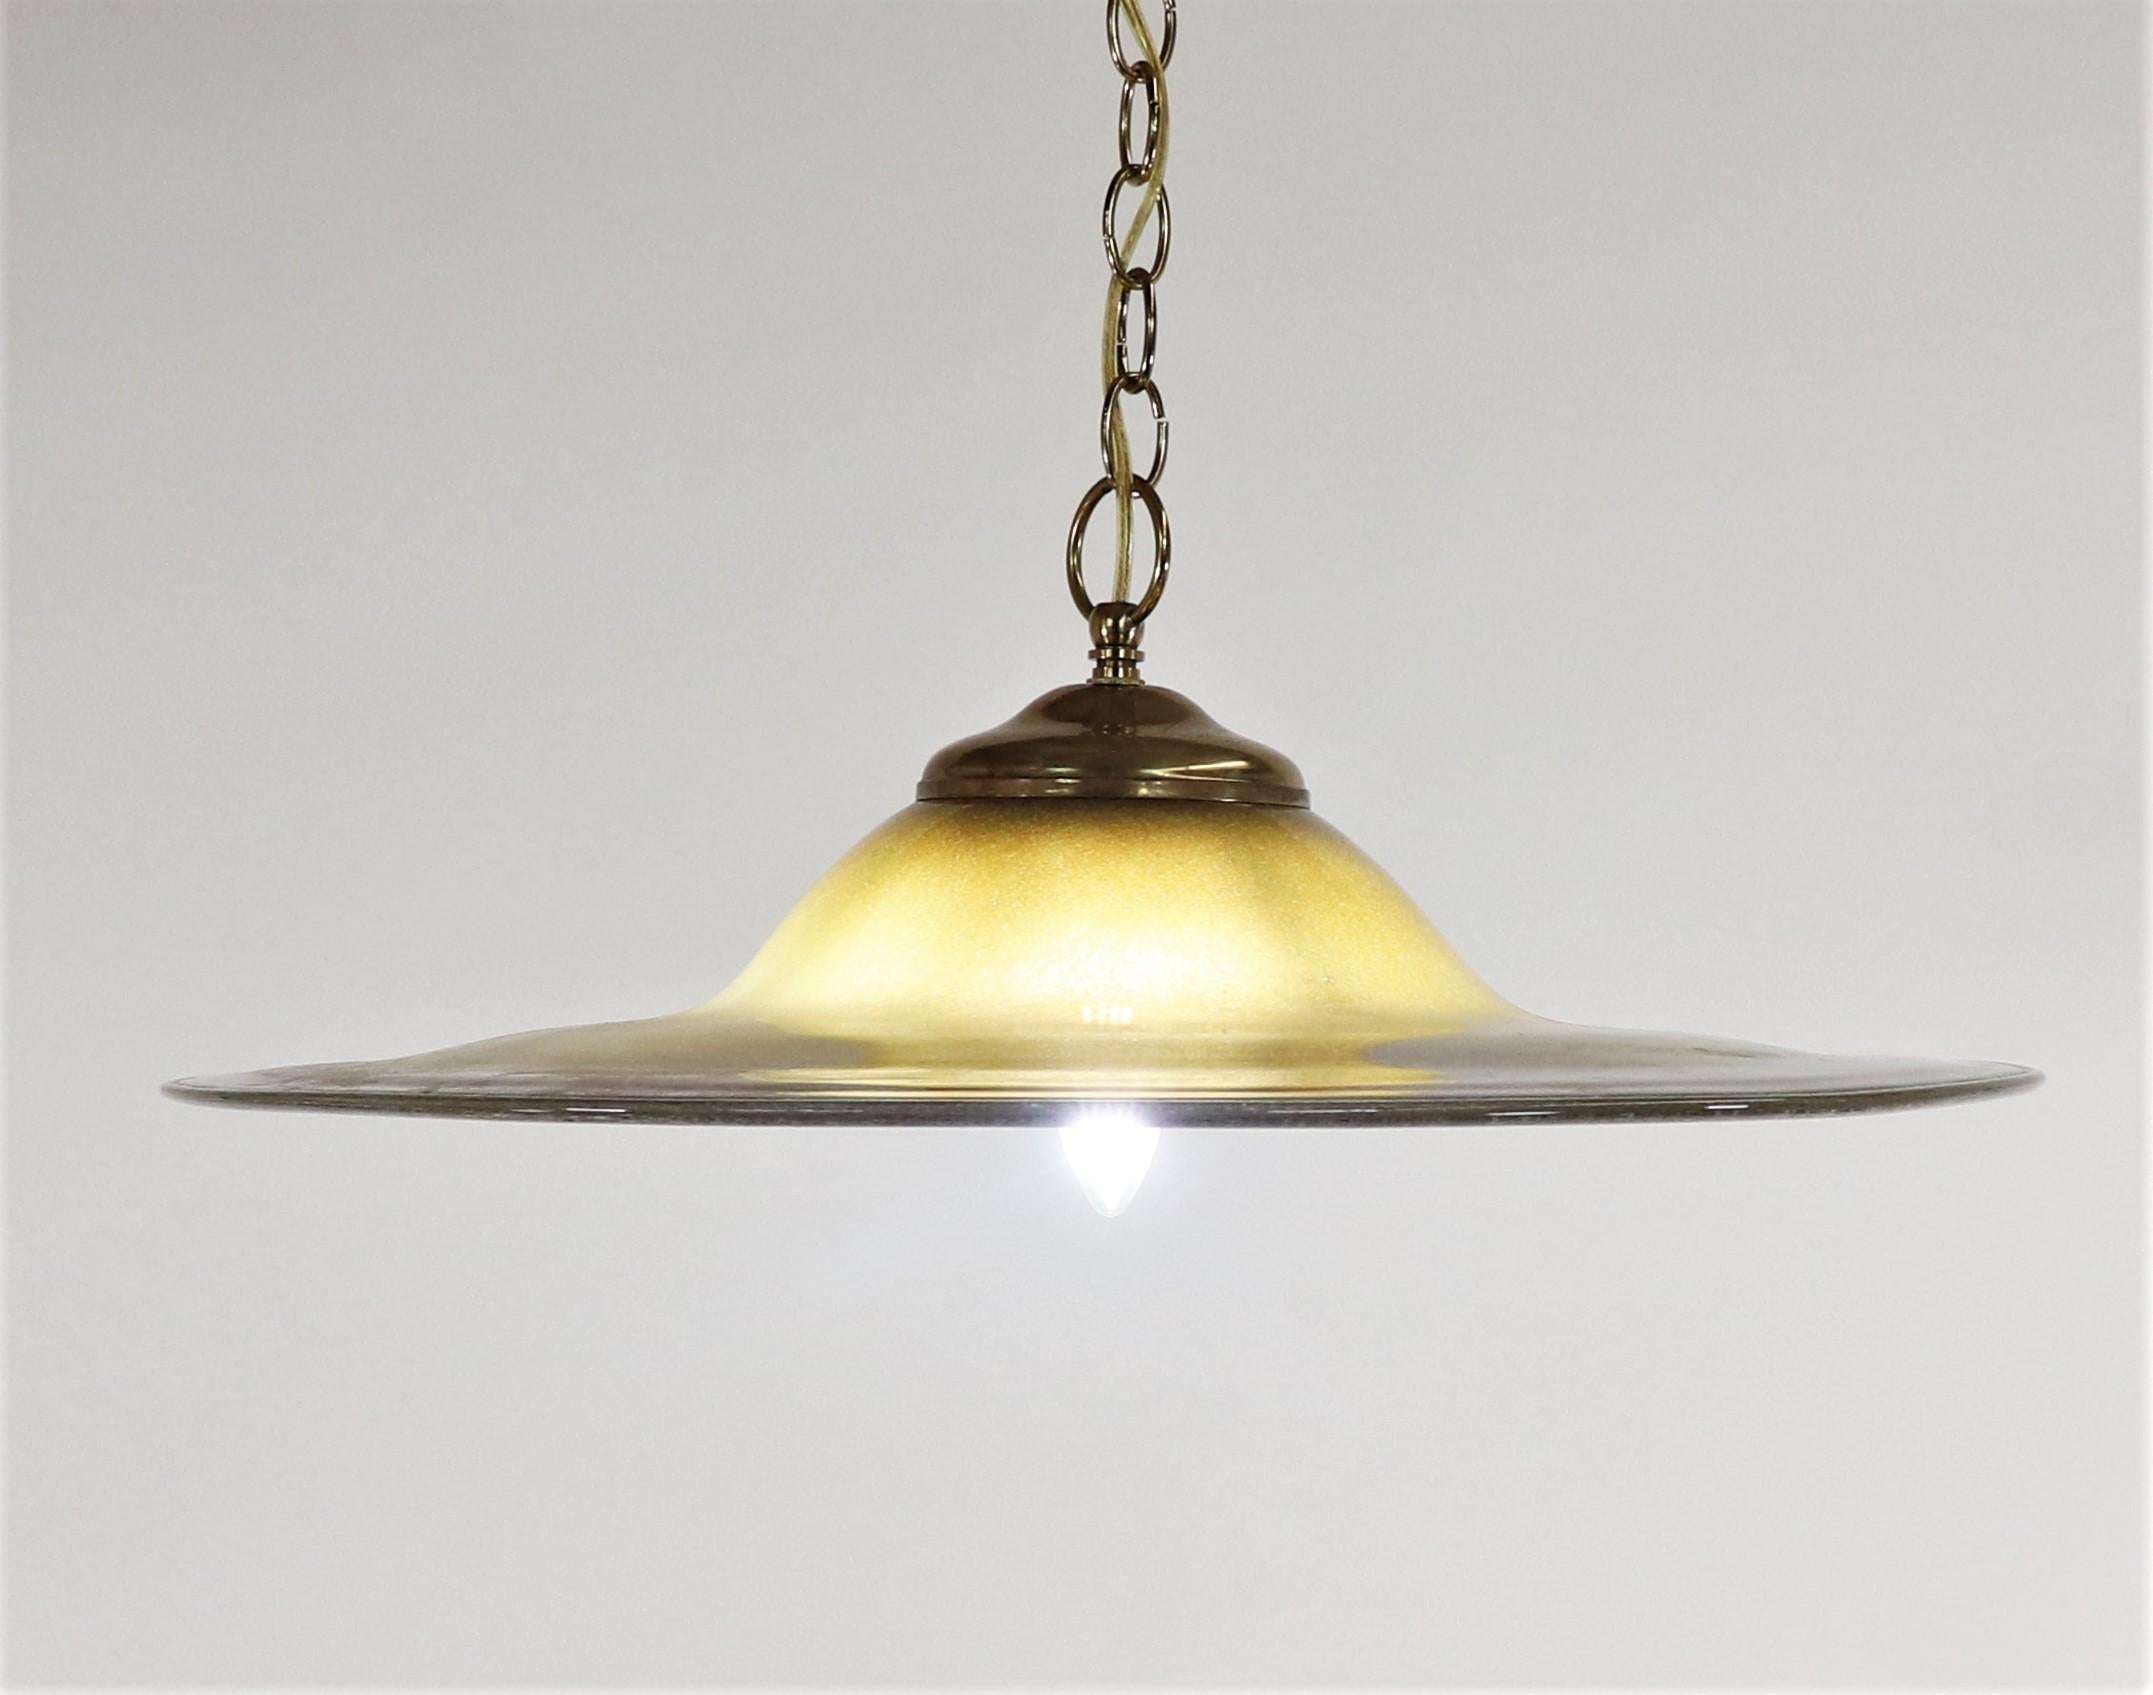 This mid-century modern Murano pendant lamp is a beautiful olive color with brick red and burnt sienna veins concentrated at the edge, reminiscent of a jasper stone. The subtle shifts in hue and density make this piece especially stunning.

The